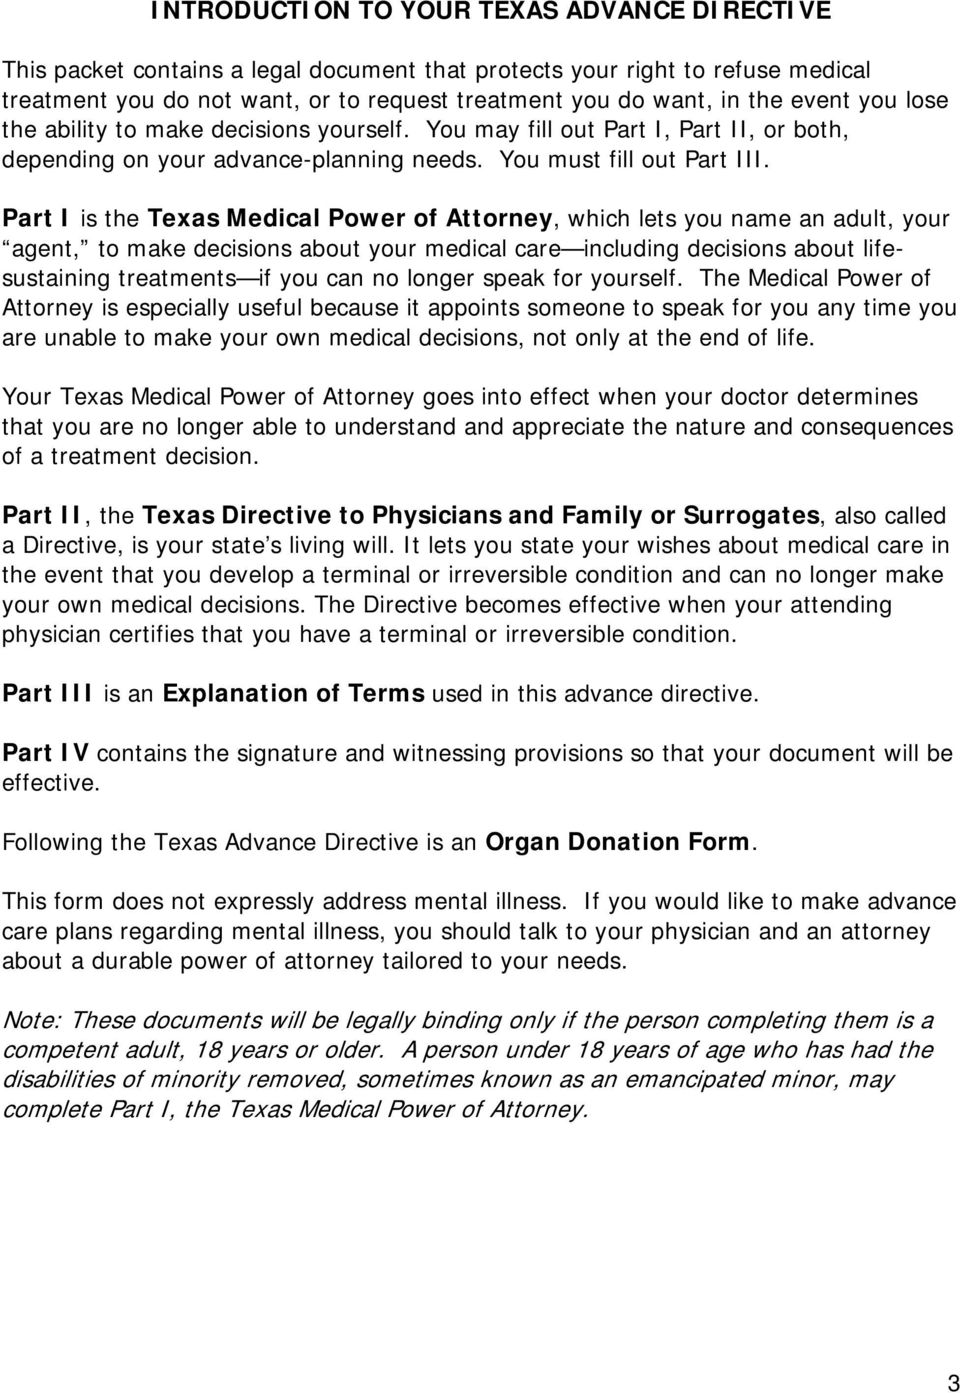 Part I is the Texas Medical Power of Attorney, which lets you name an adult, your agent, to make decisions about your medical care including decisions about lifesustaining treatments if you can no